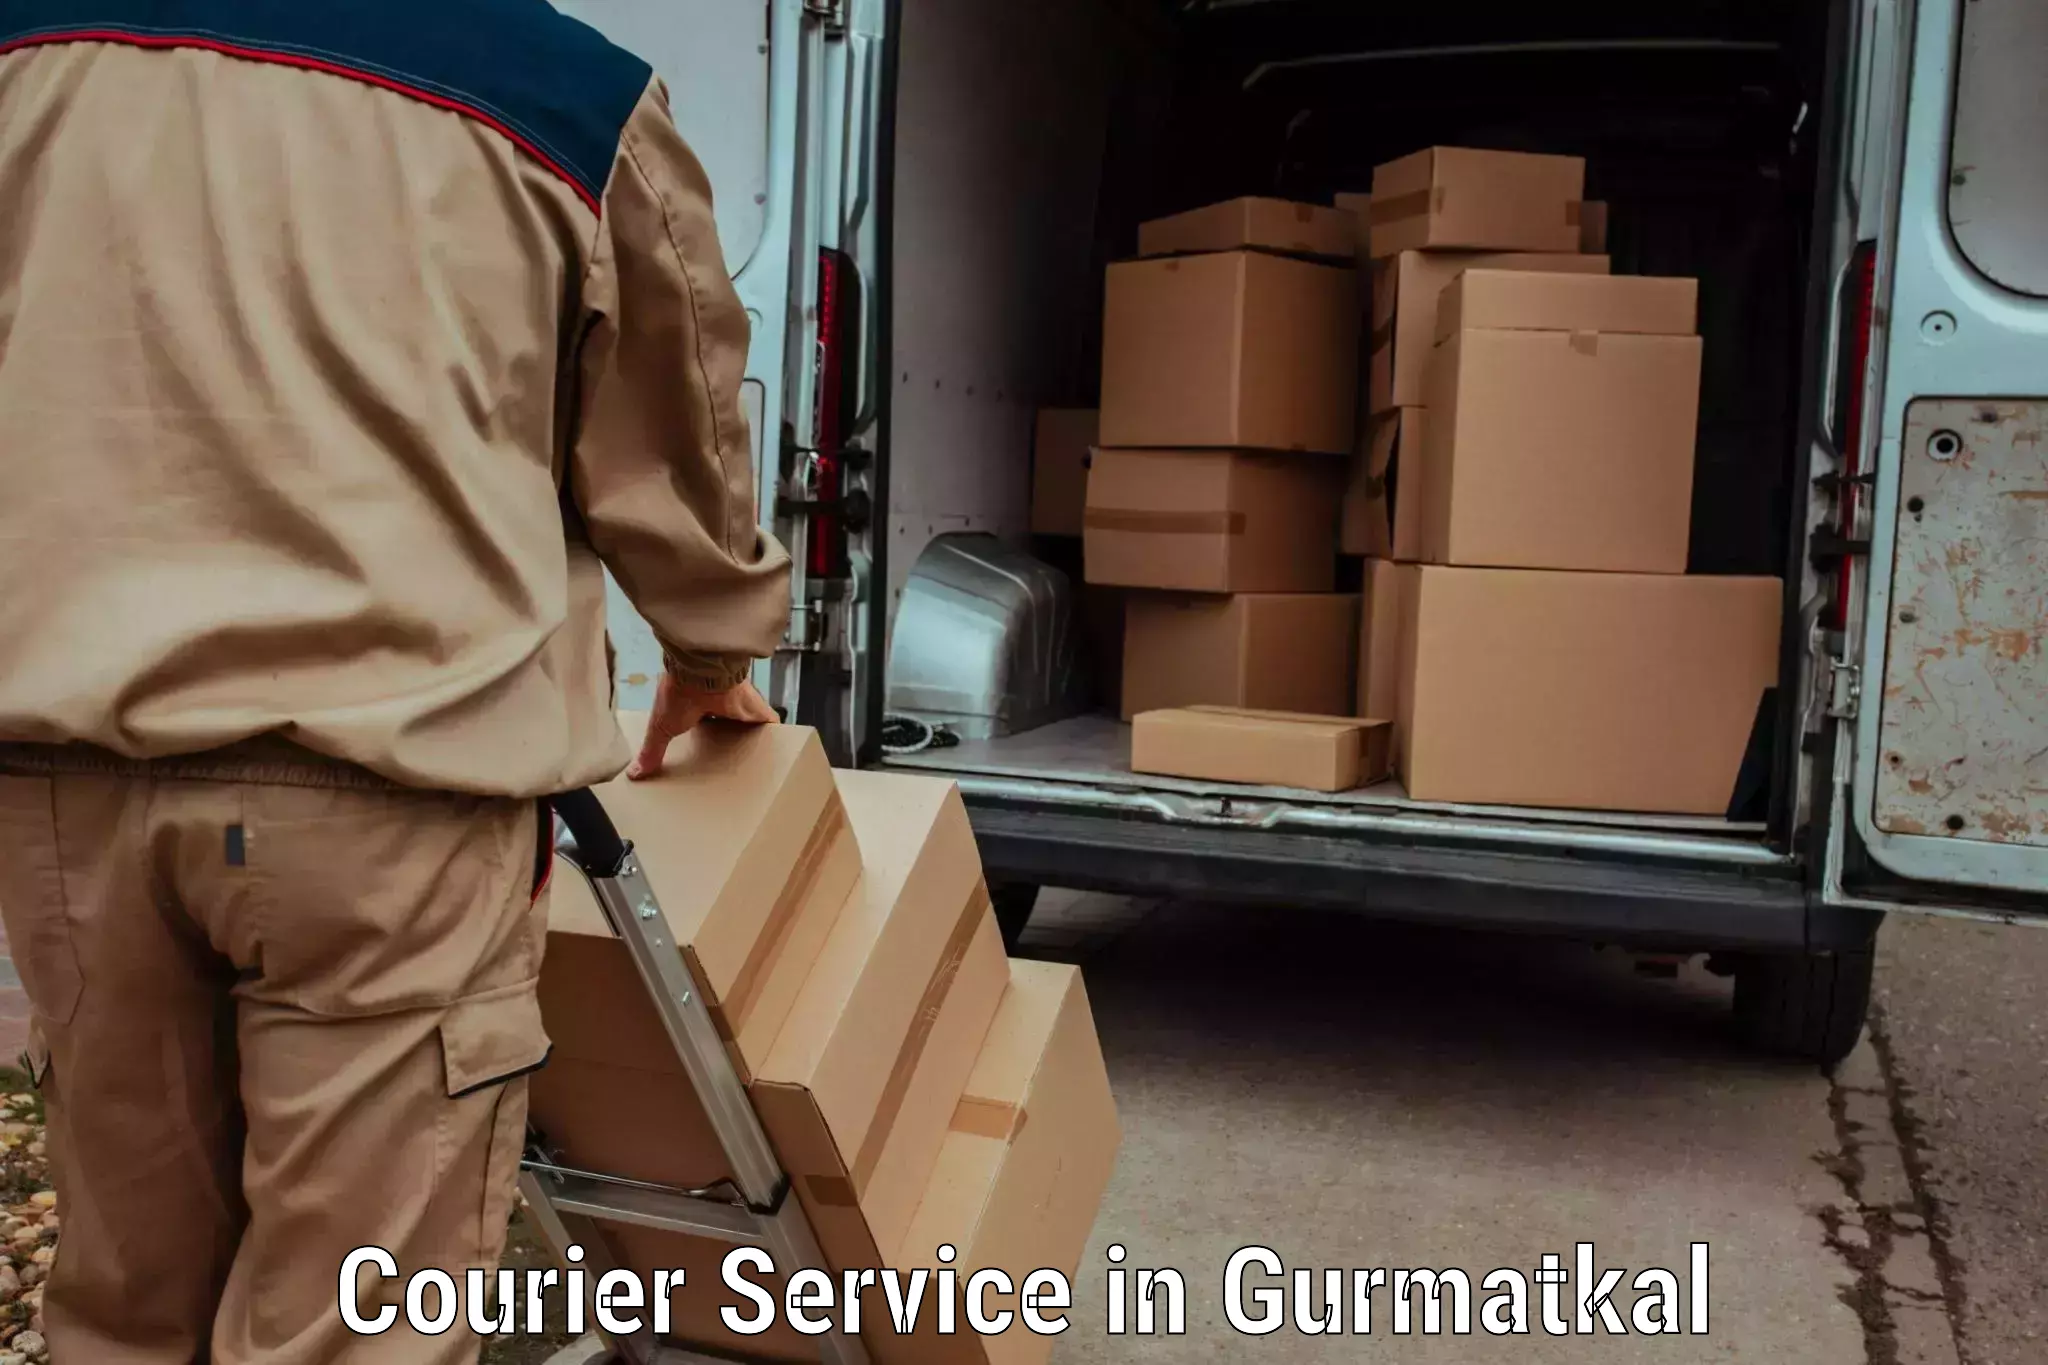 Efficient package consolidation in Gurmatkal